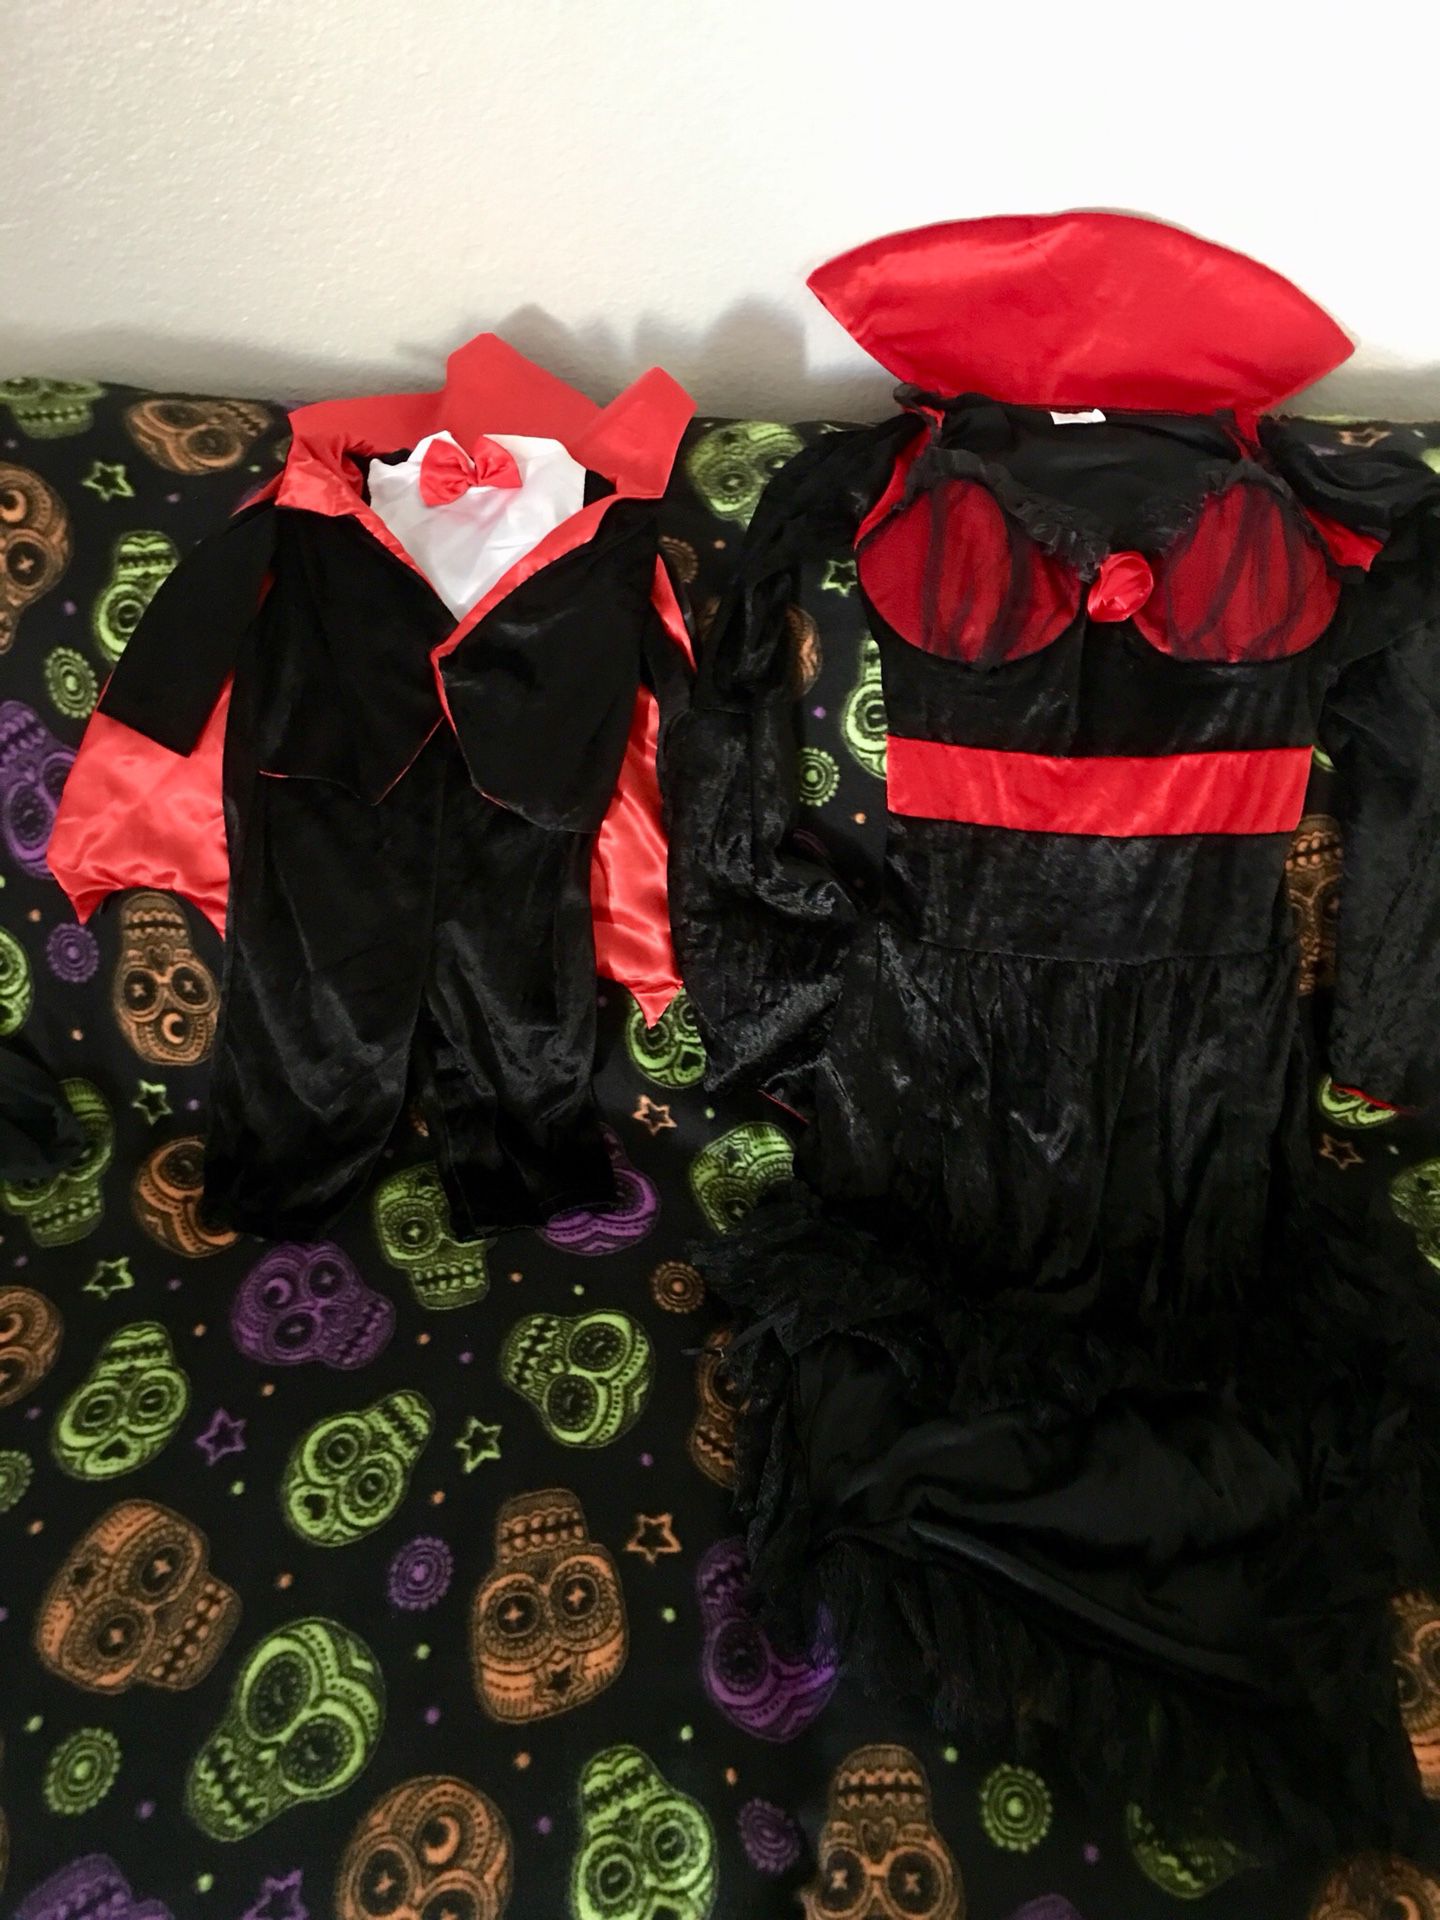 Mommy and Me Vampire Halloween Costumes Size S/M and 12-18 Months